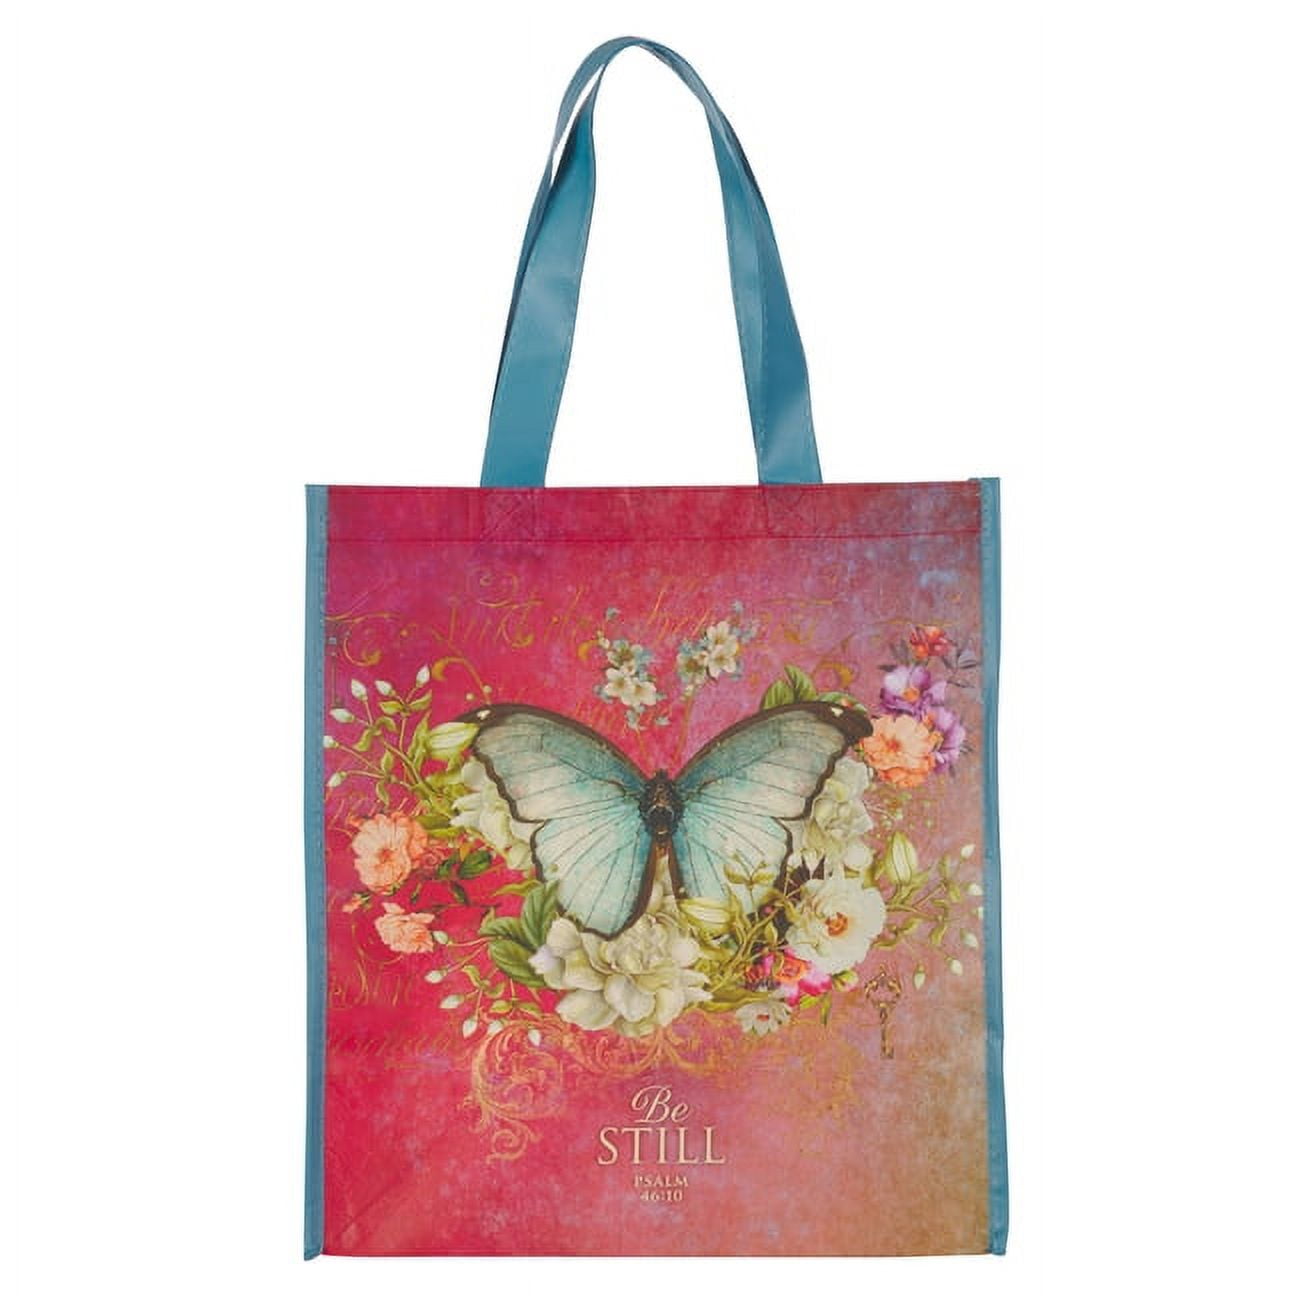 Inspirational Christian Tote Bags For Women Religious Tote Gifts Be Still  Reusable Shopping Tote BookBag For Church Events Bible Study Work Travel